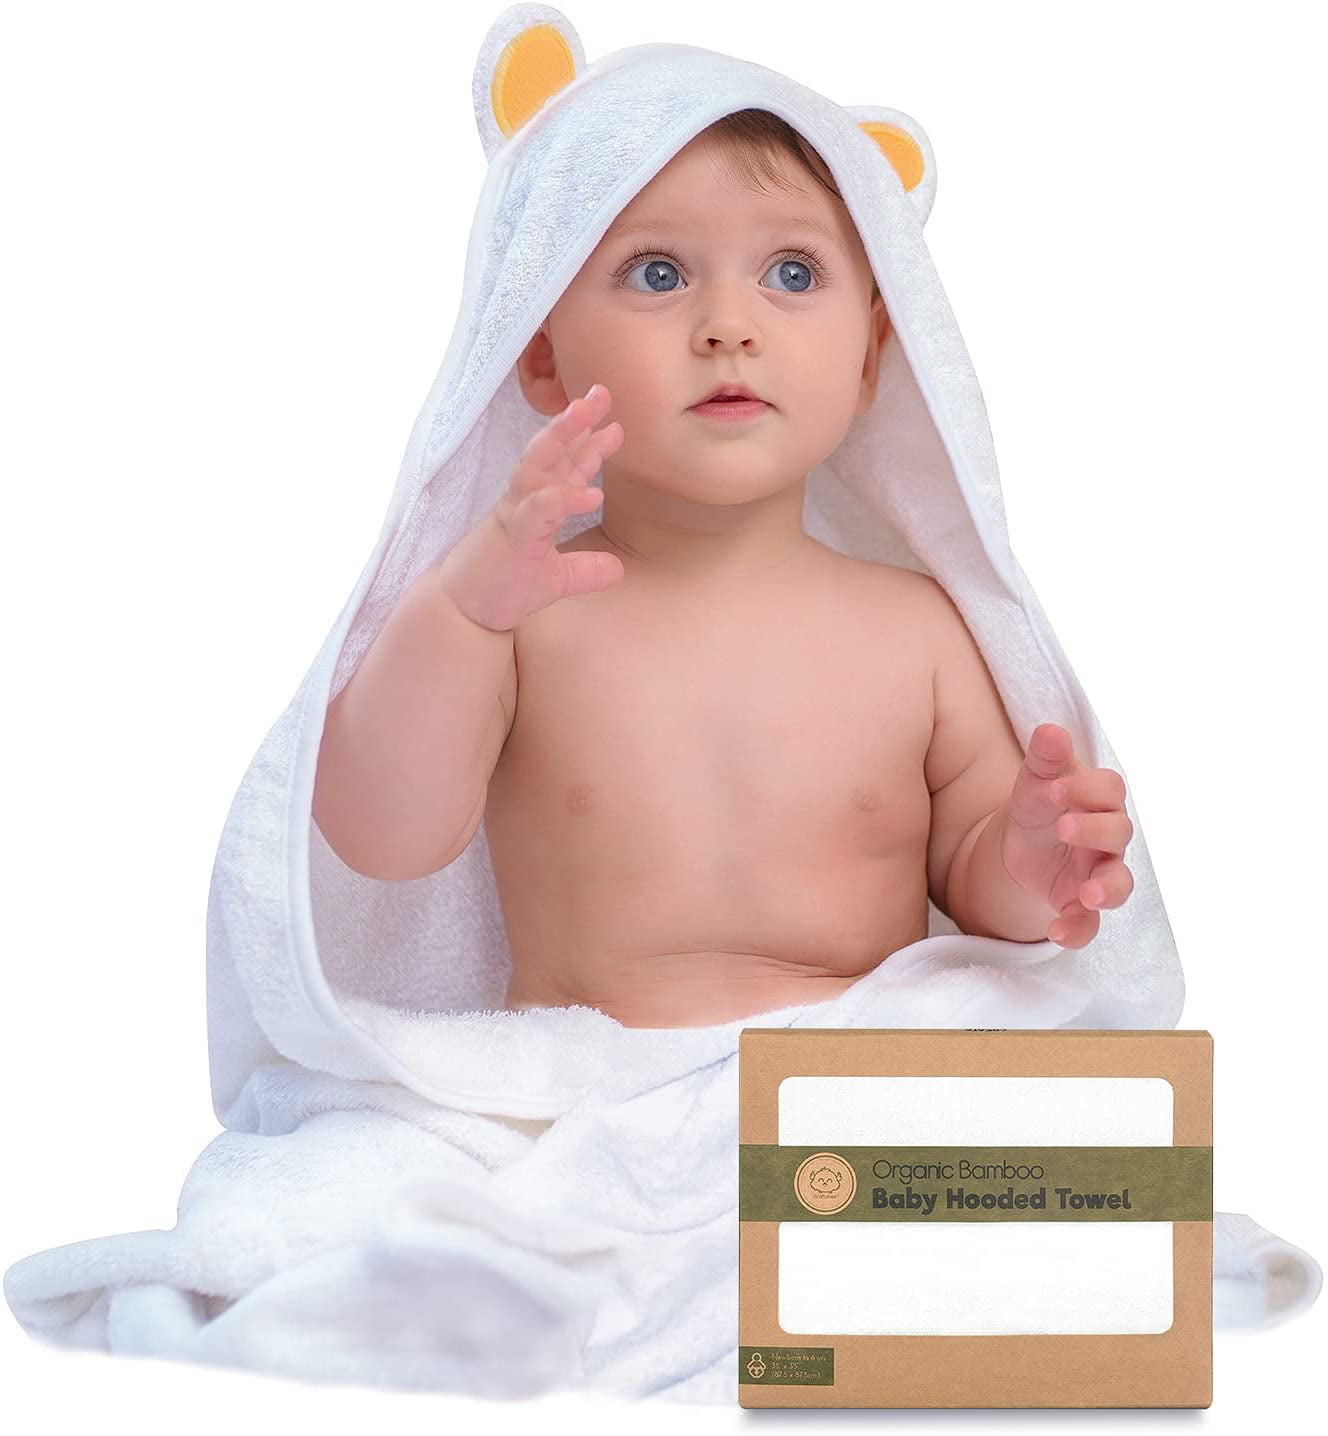 Baby Hooded Towel Extra Soft Blanket Bear Face Absorbent Toddler Bath Towel Infant Shower Present Newborn Plush Receiving Blankets White